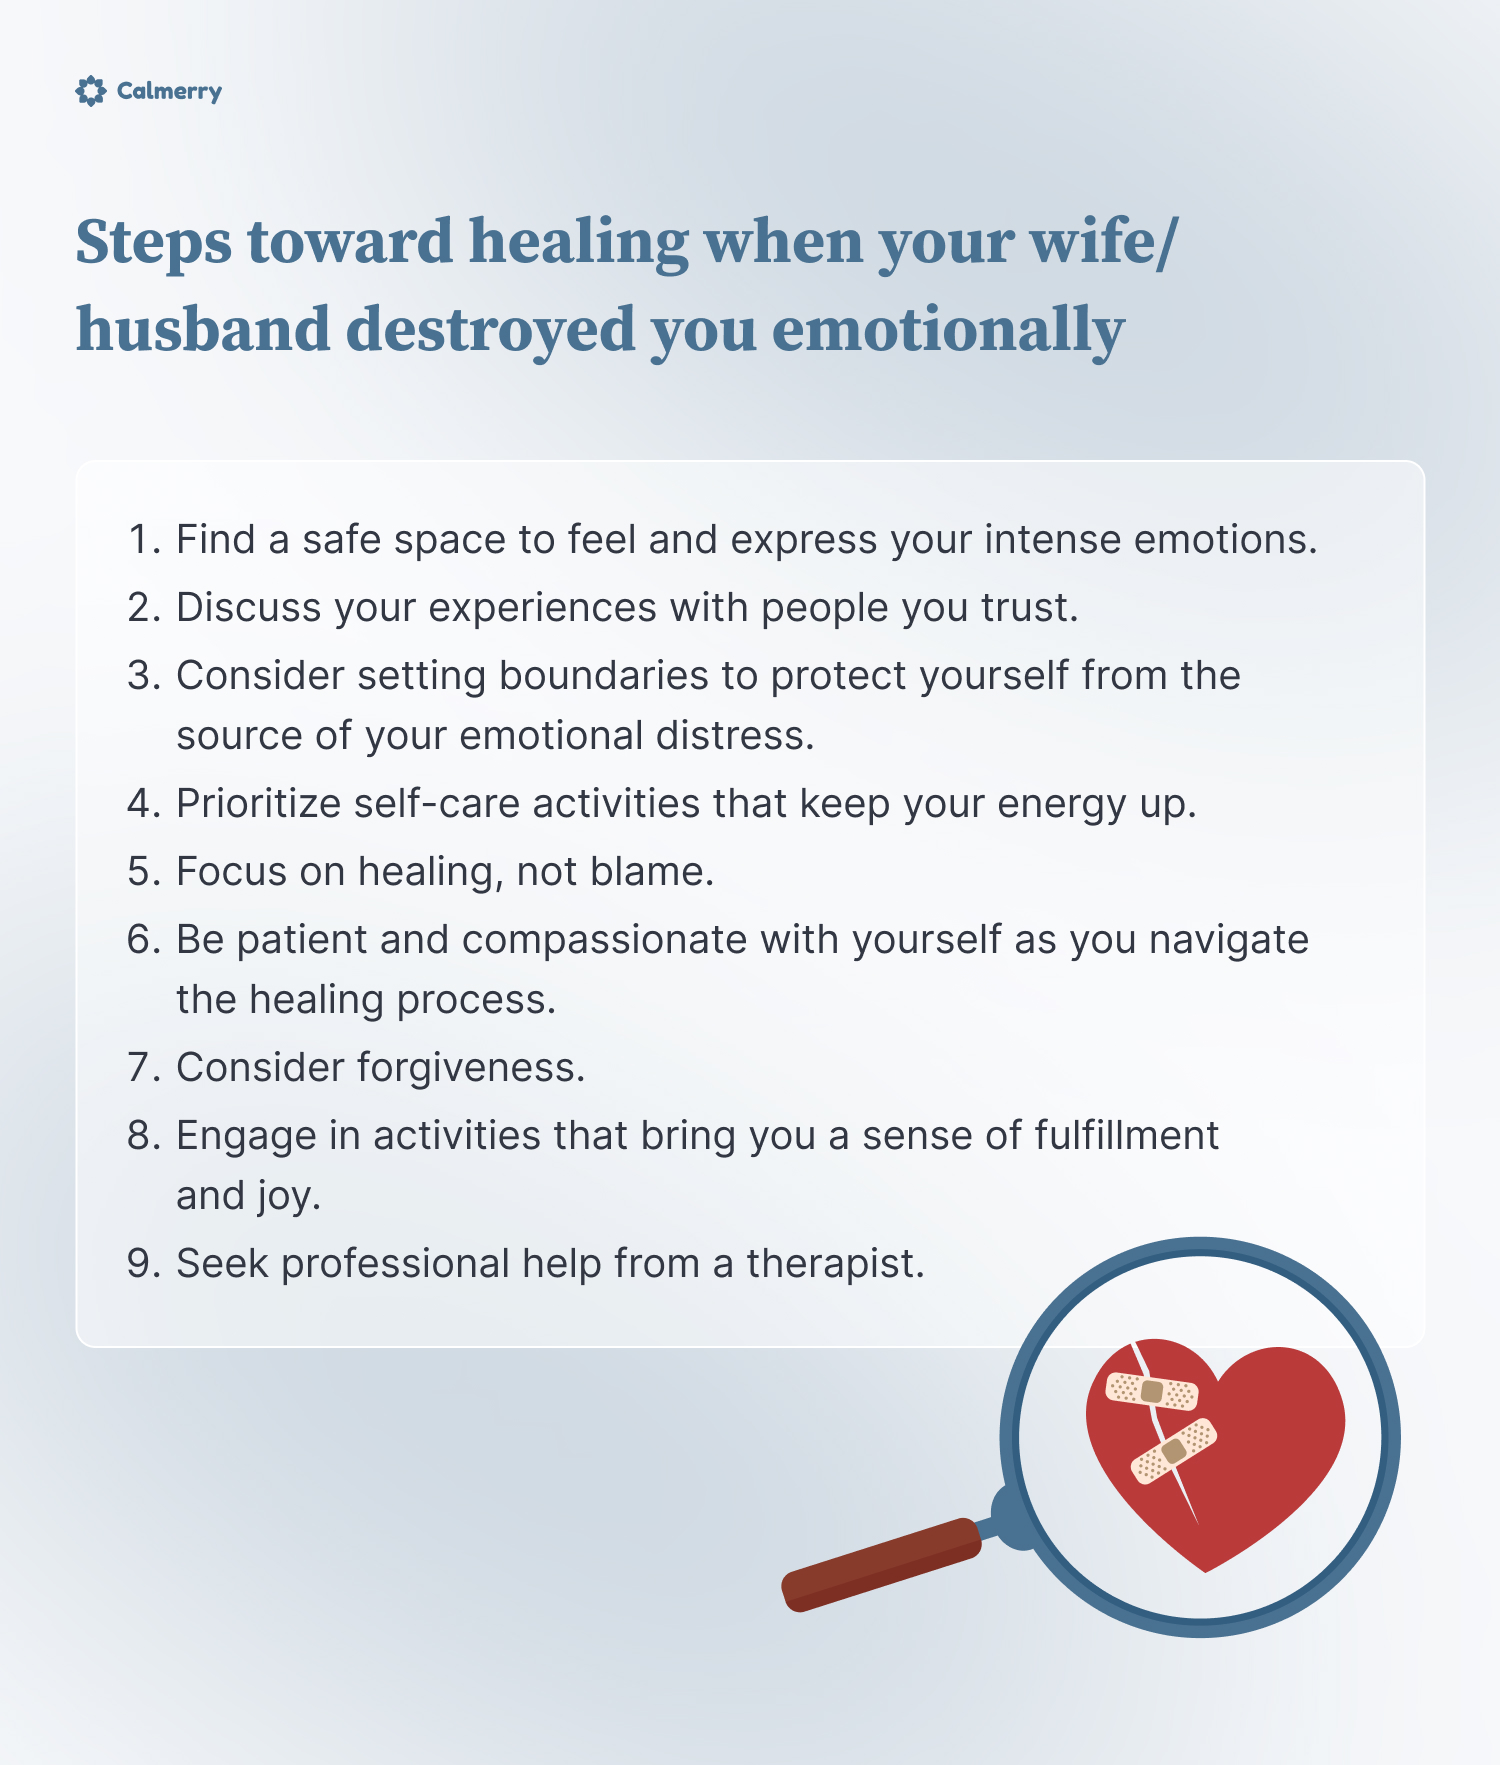 Steps toward healing when your wife/husband destroyed you emotionally
1. Find a safe space to feel and express your intense emotions
2. Discuss your experiences with people you trust
3. Consider setting boundaries to protect yourself from the source of your emotional distress
4. Prioritize self-care activities that keep your energy up
5. Focus on healing, not blame
6. Be patient and compassionate with yourself as you navigate the healing process. 
7. Consider forgiveness
8. Engage in activities that bring you a sense of fulfillment and joy.
9. Seek professional help from a therapist